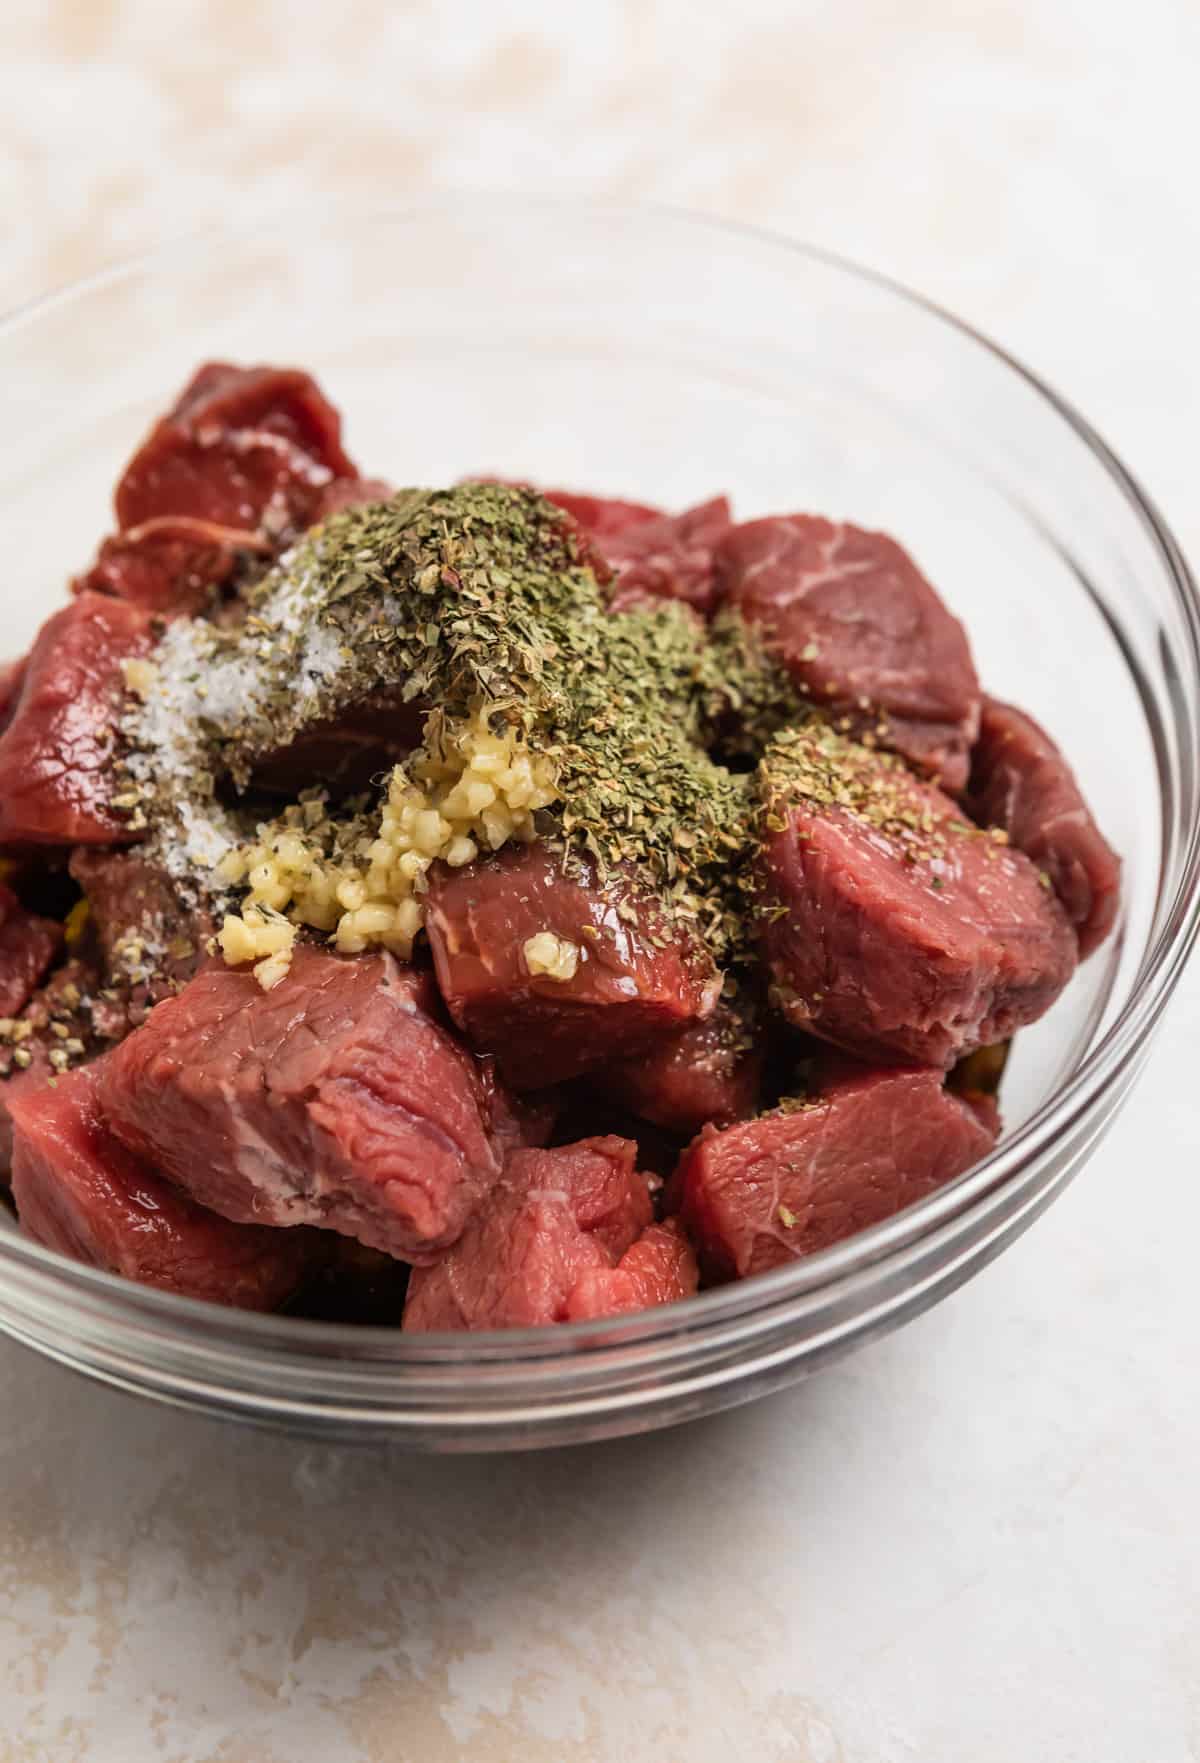 Steack cubes in glass bowl with garlic, herbs and marinade ingredients.